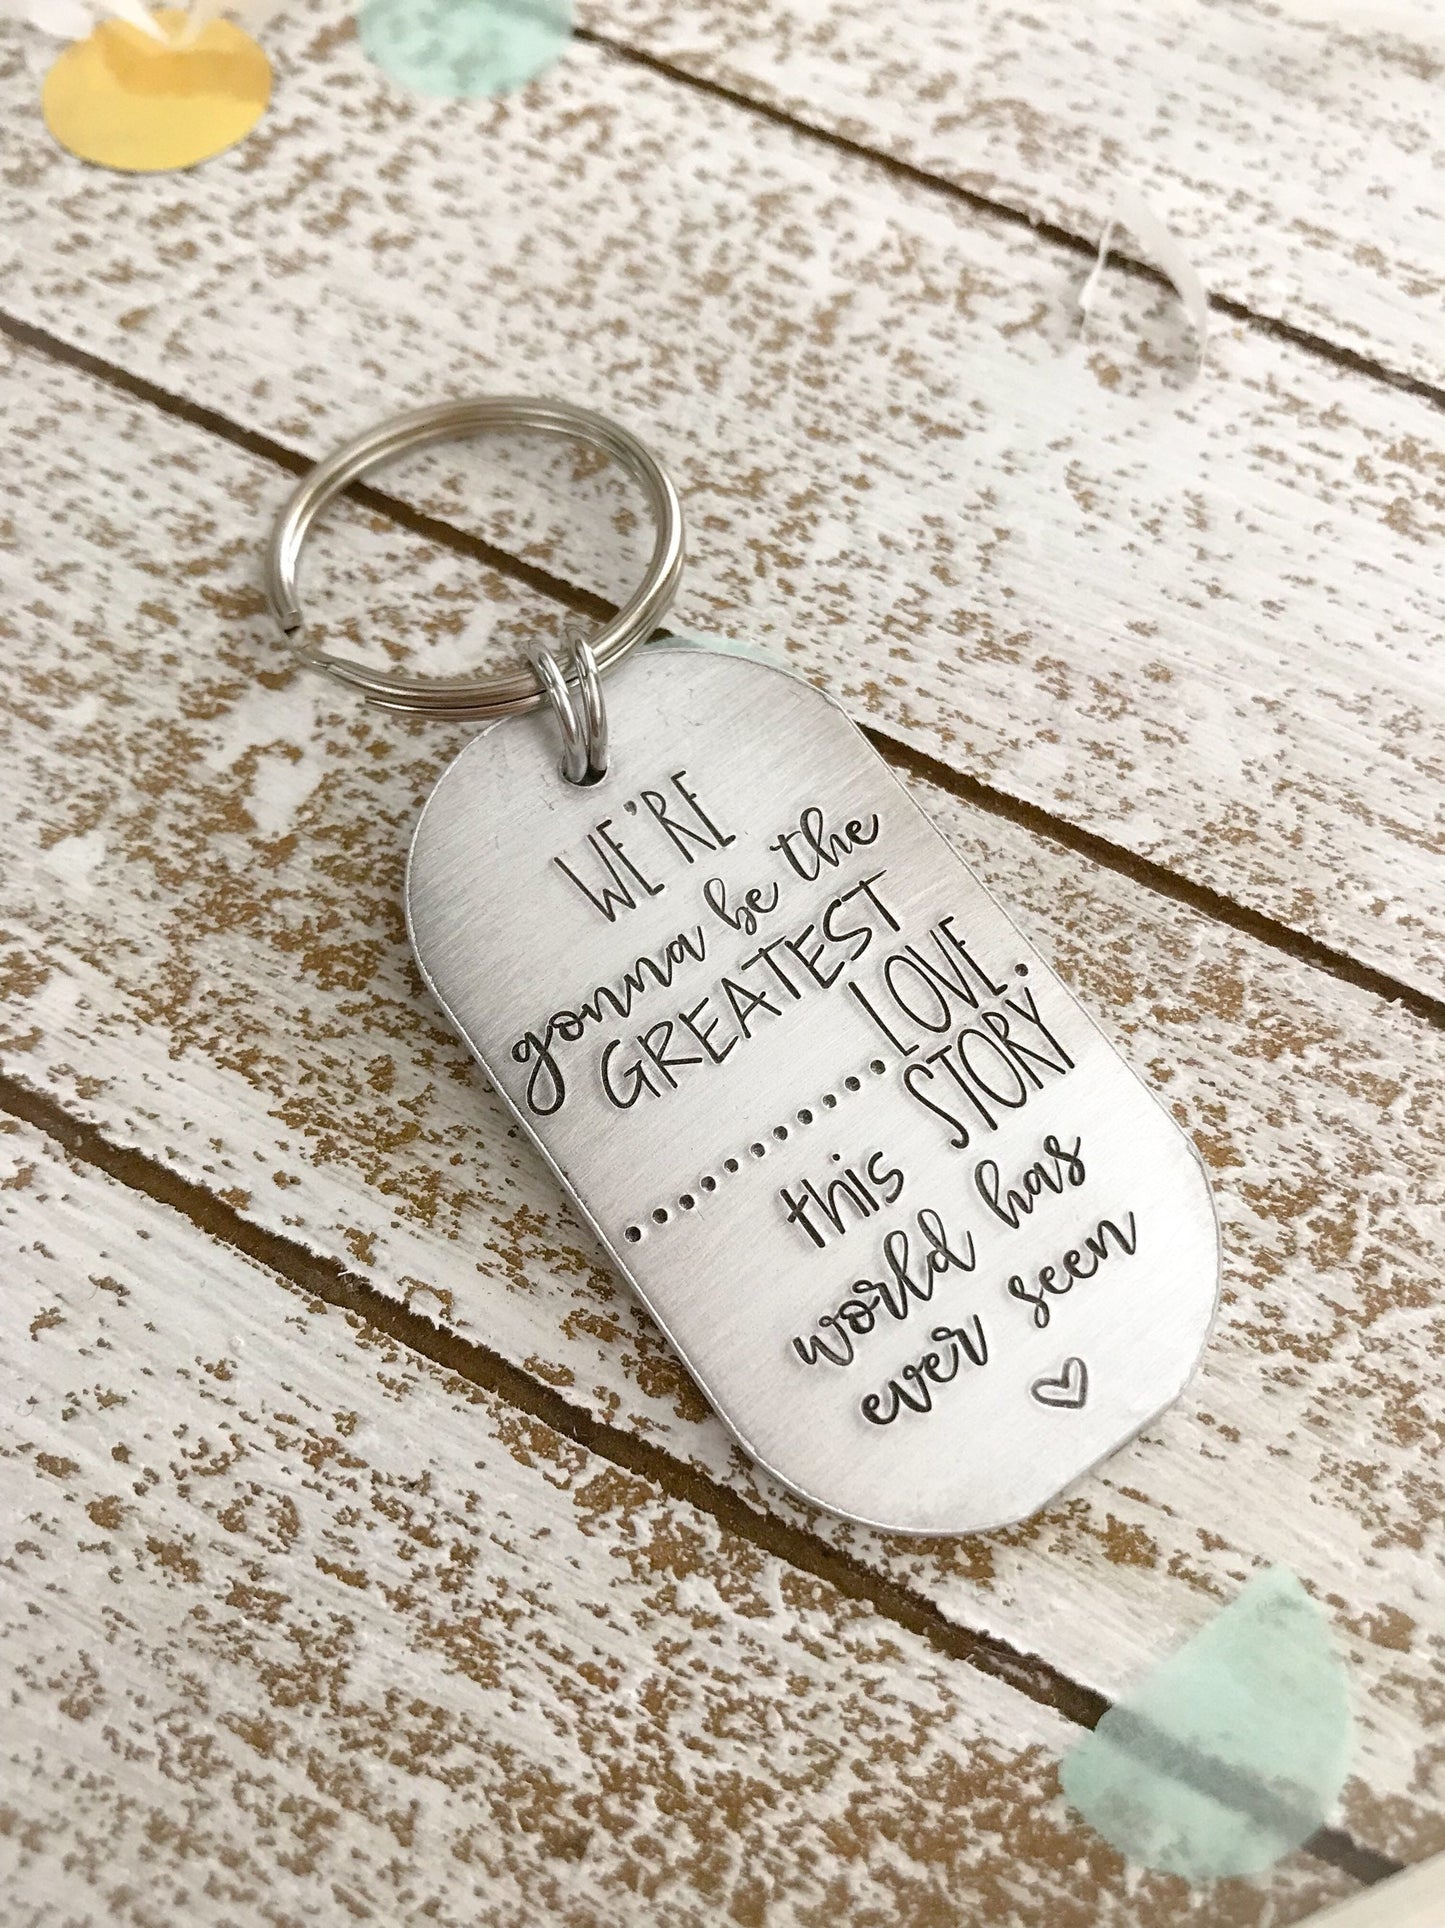 We're Gonna Be the Greatest Love Story Keychain